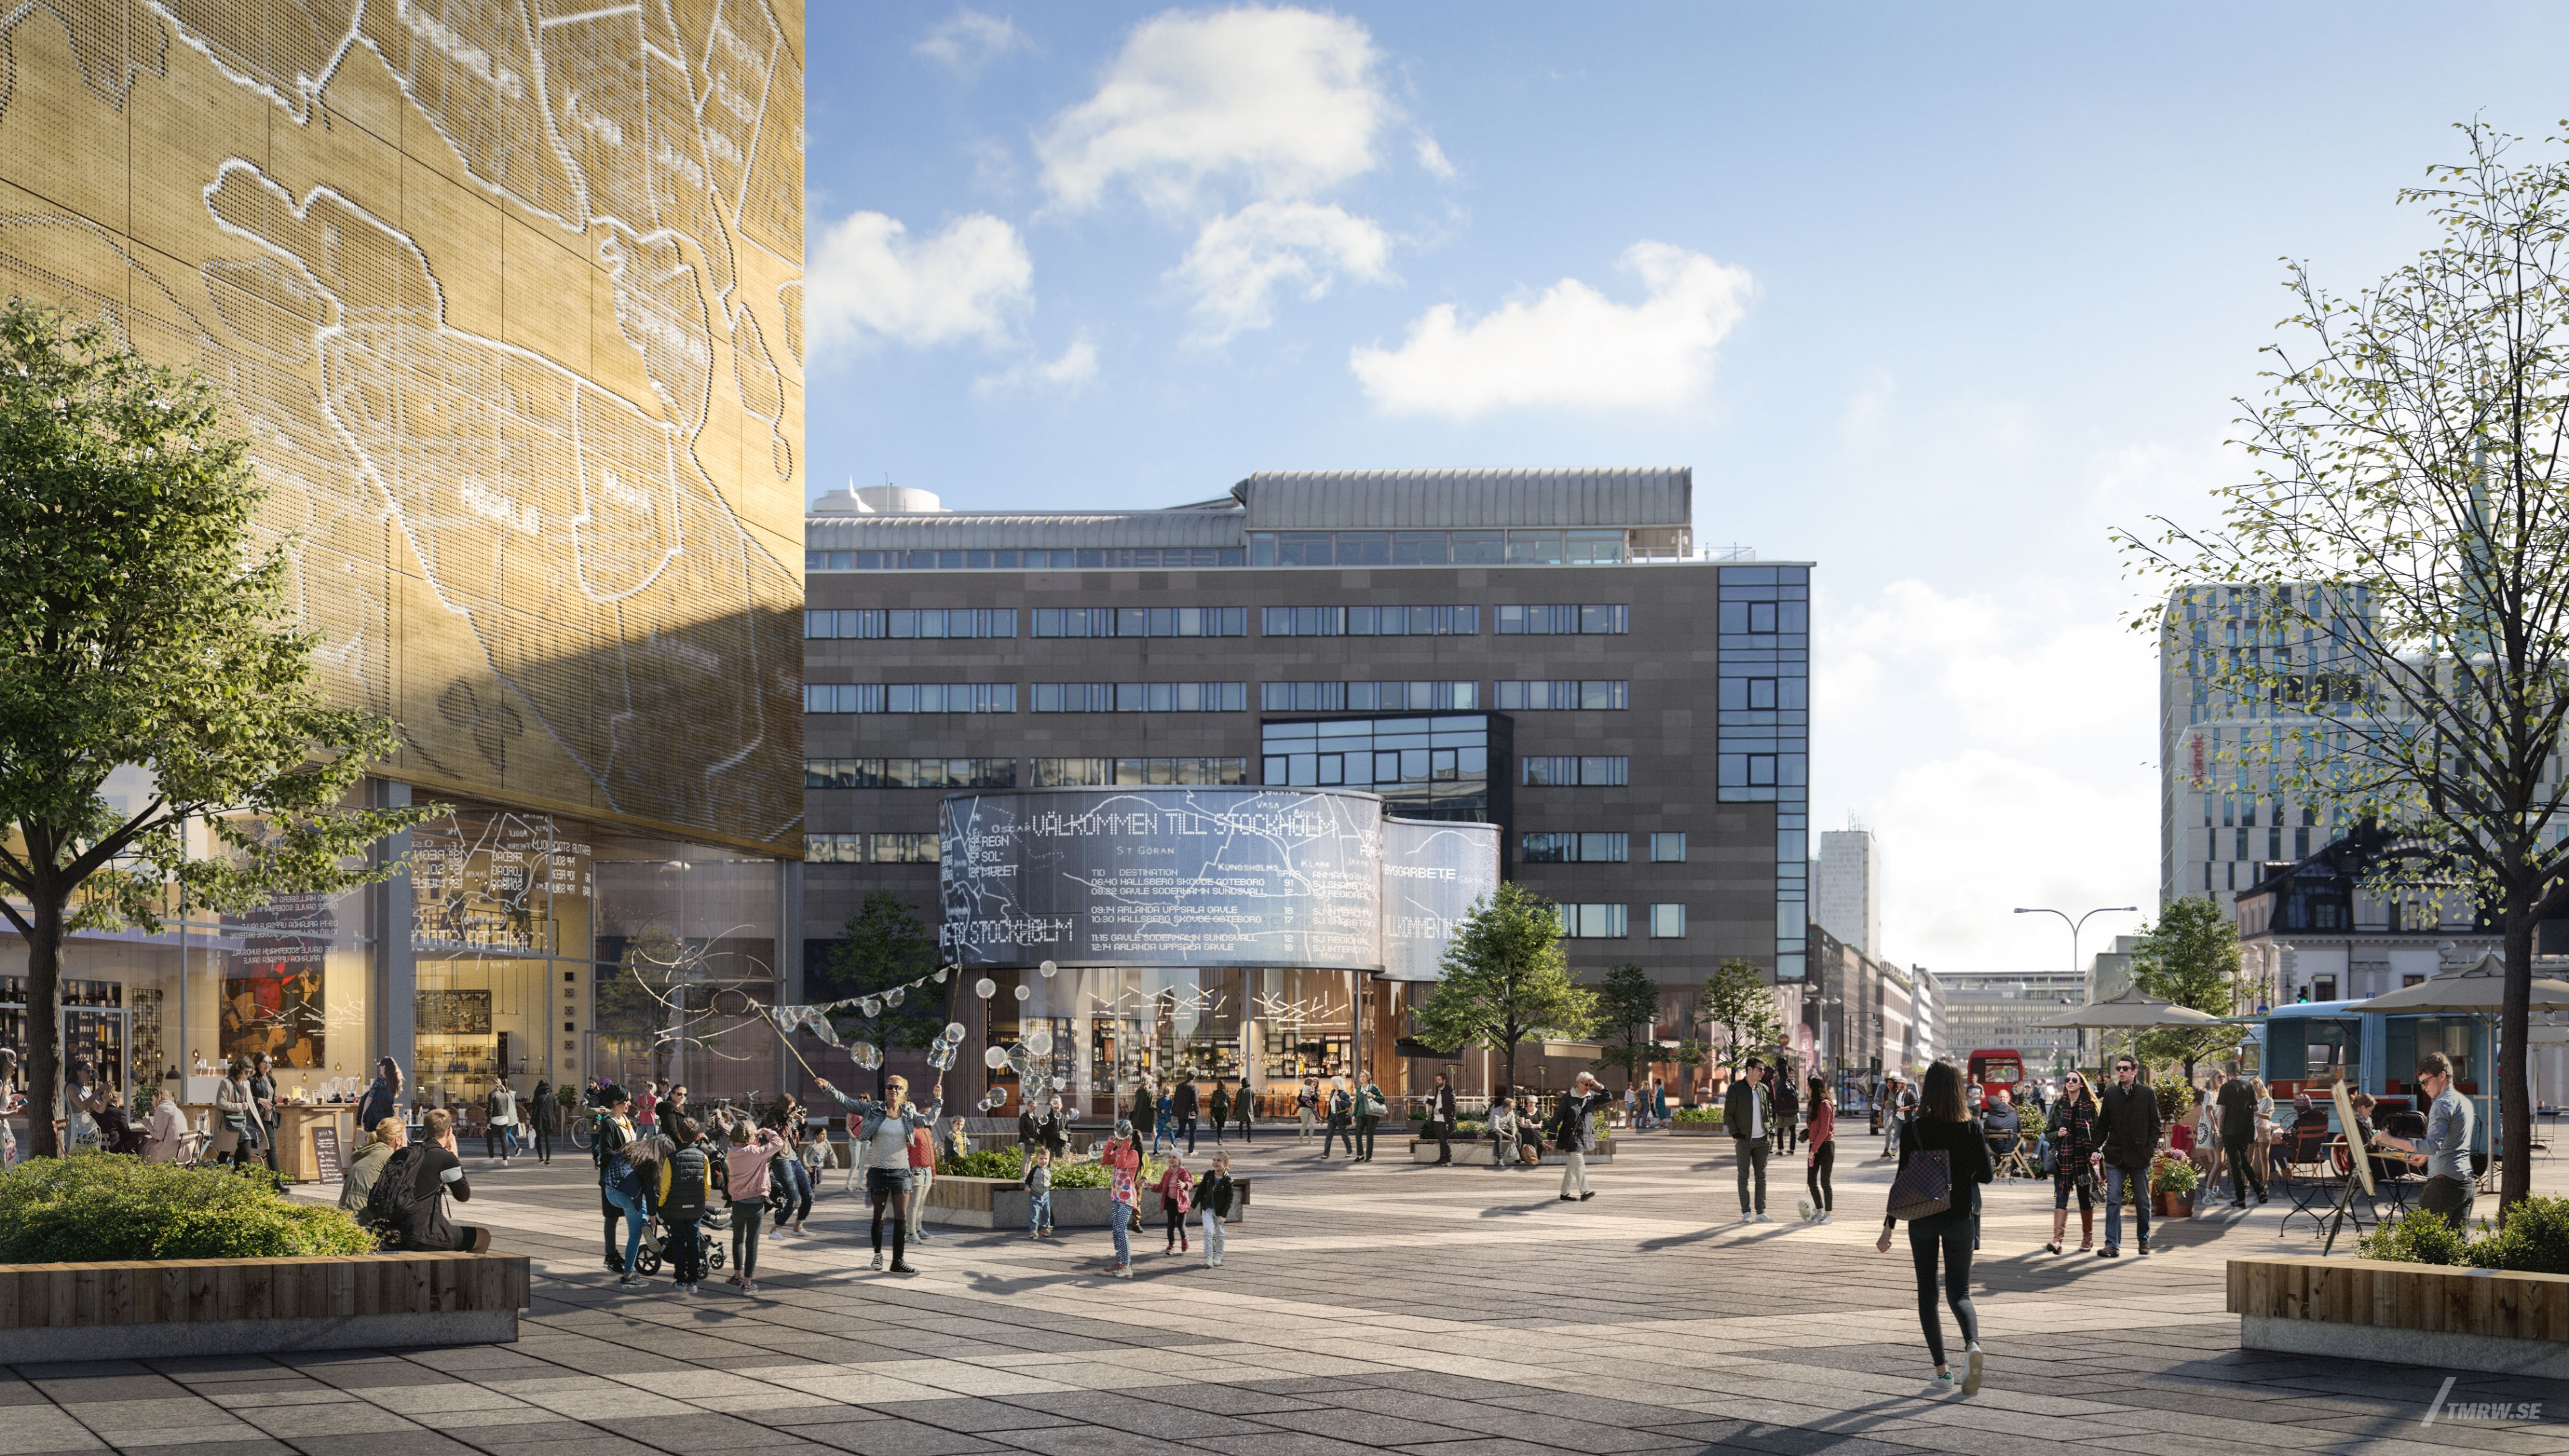 Architectural visualization of Sthlm Central for Jernhusen. A shot of a square with pedestrians from street view in daylight with buildings in the background.